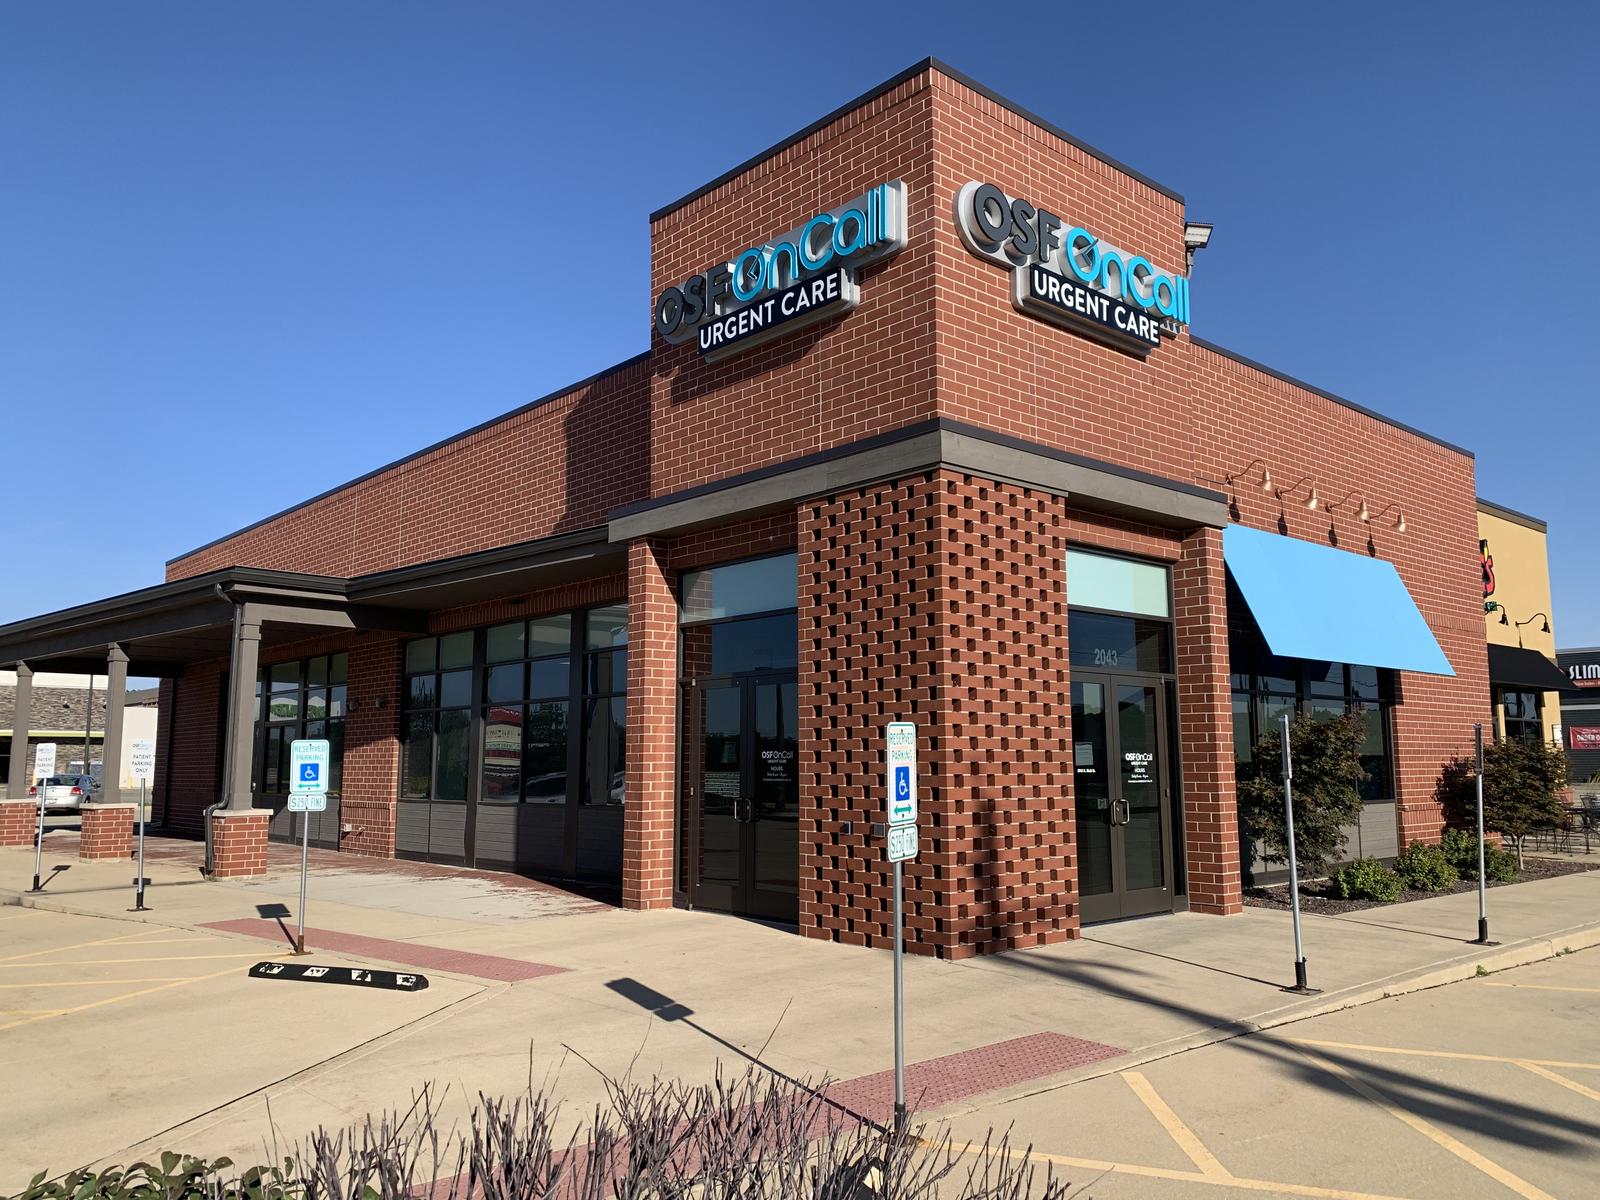 OSF OnCall Urgent Care, 2043 S. Neil Street, Champaign, Illinois, 61820